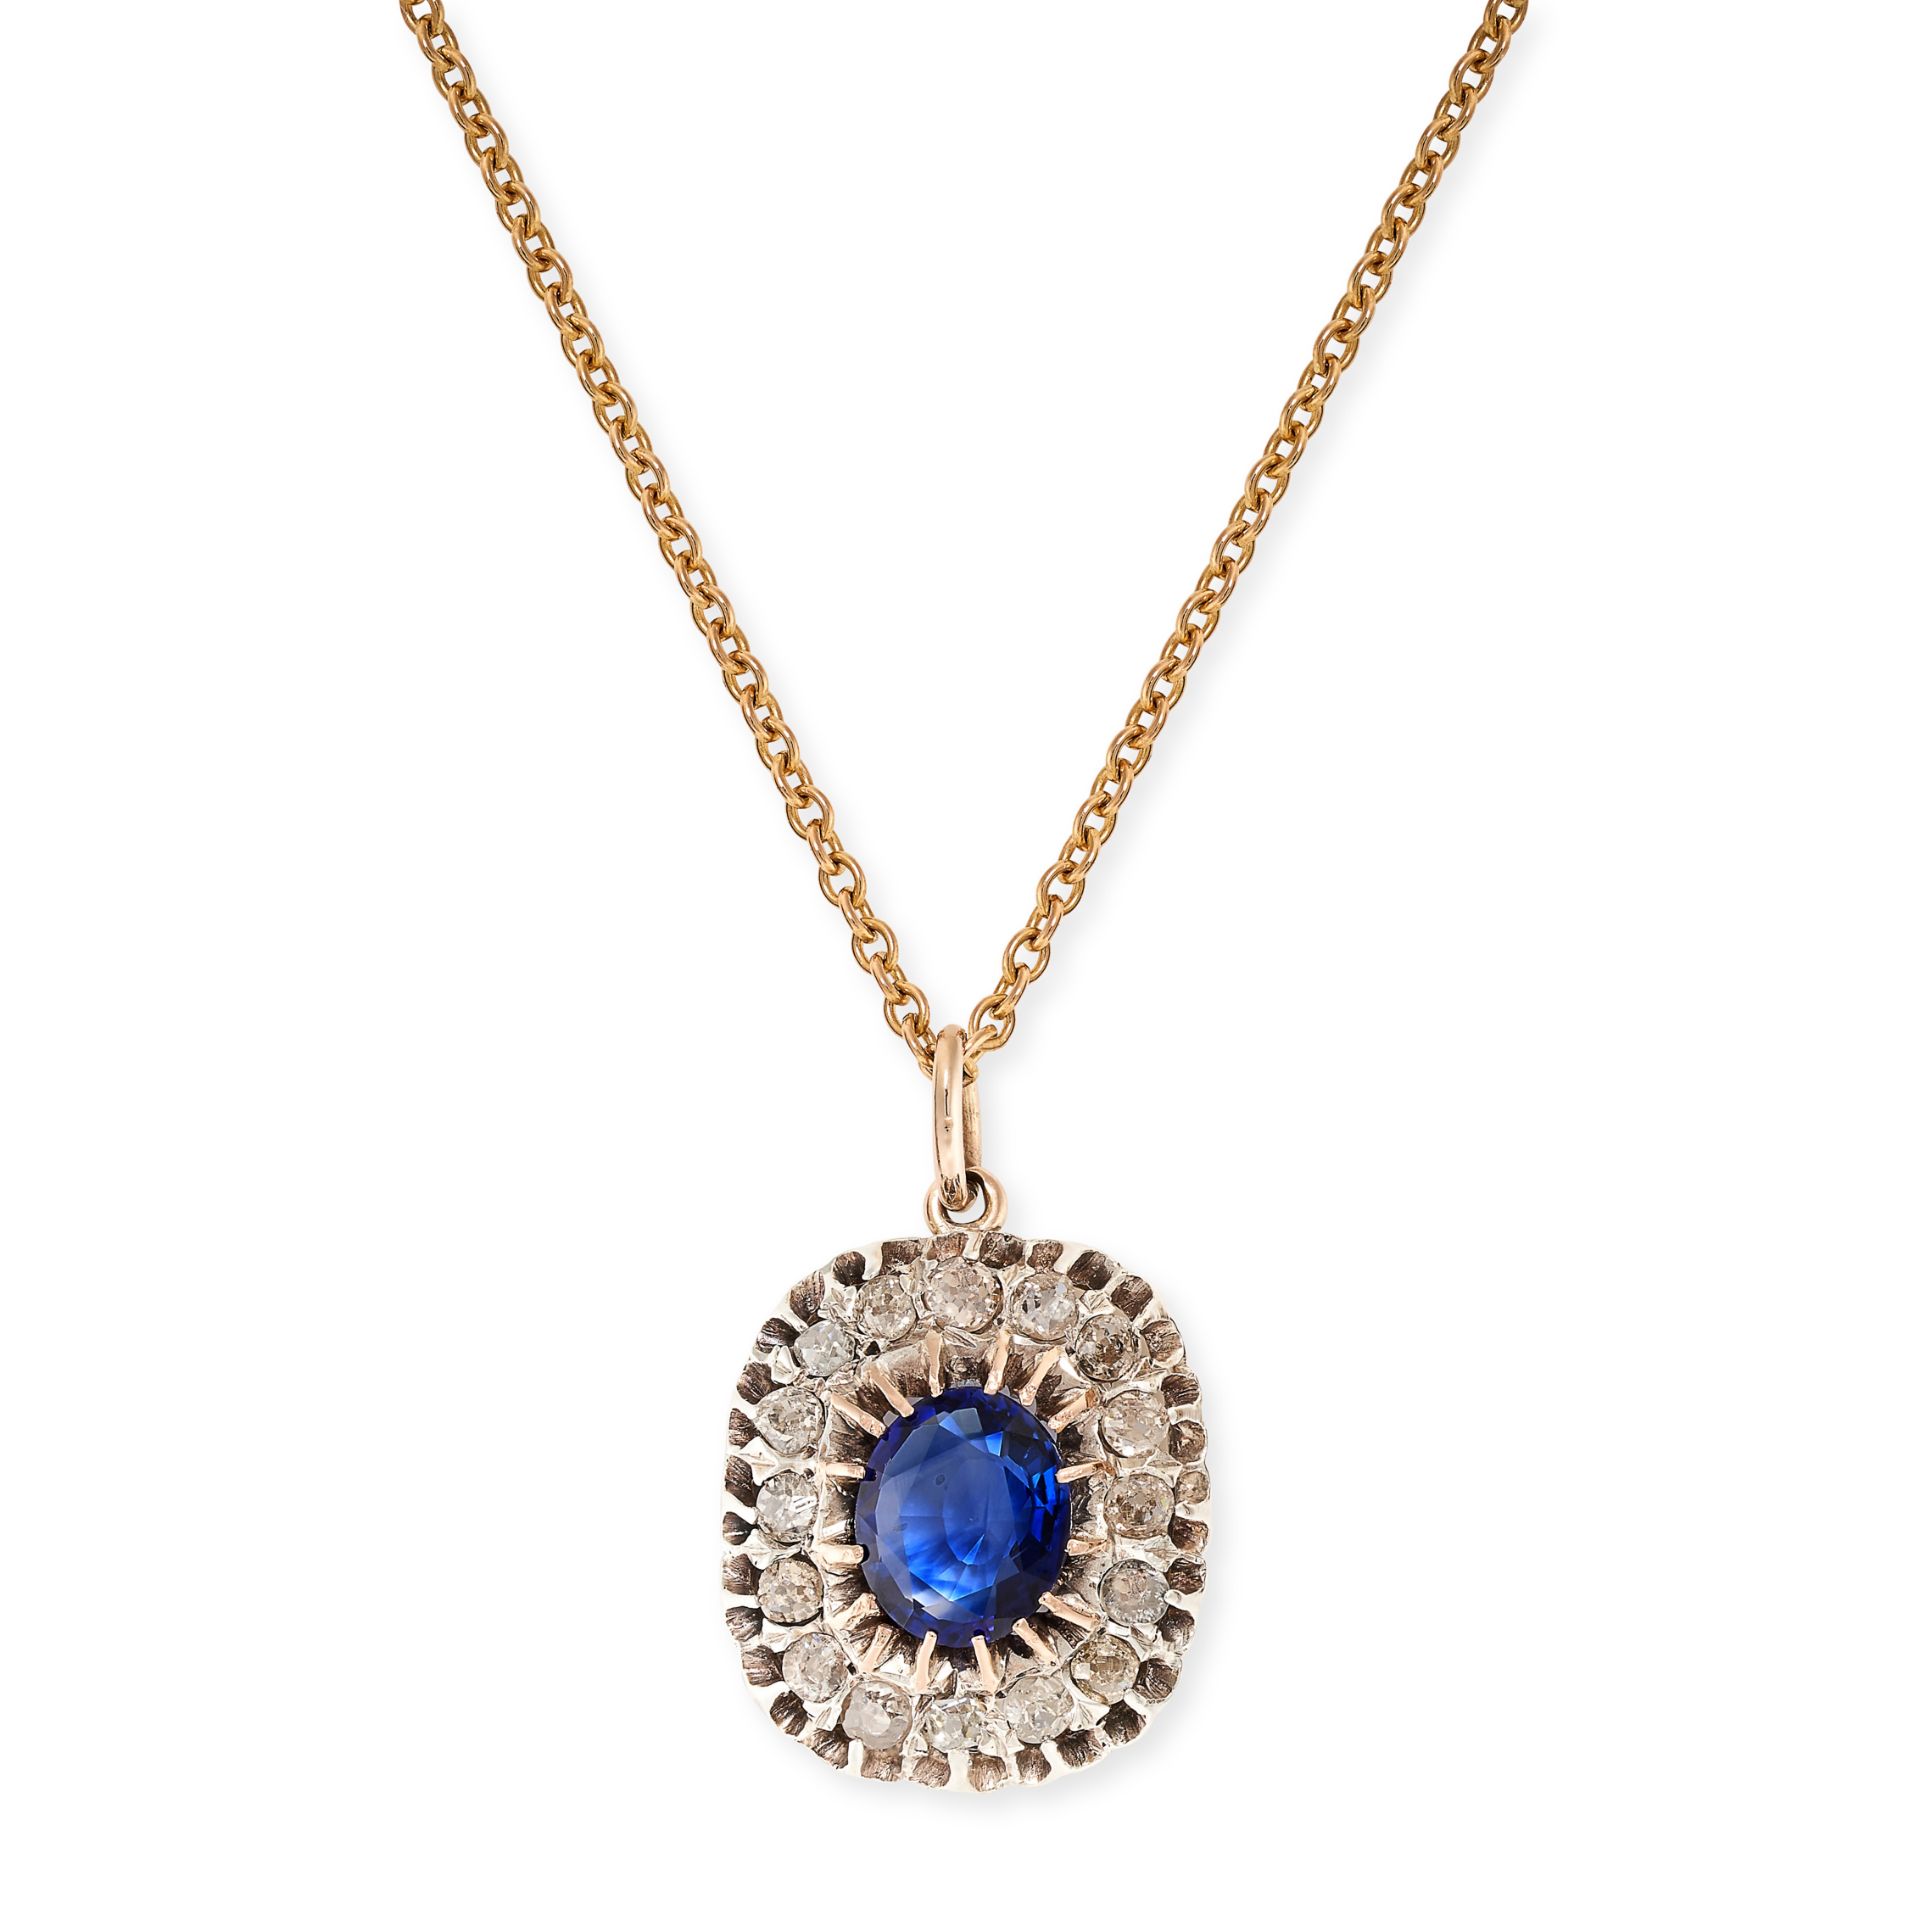 A VINTAGE SAPPHIRE AND DIAMOND PENDANT AND CHAIN in yellow gold, set with a central oval cut blue